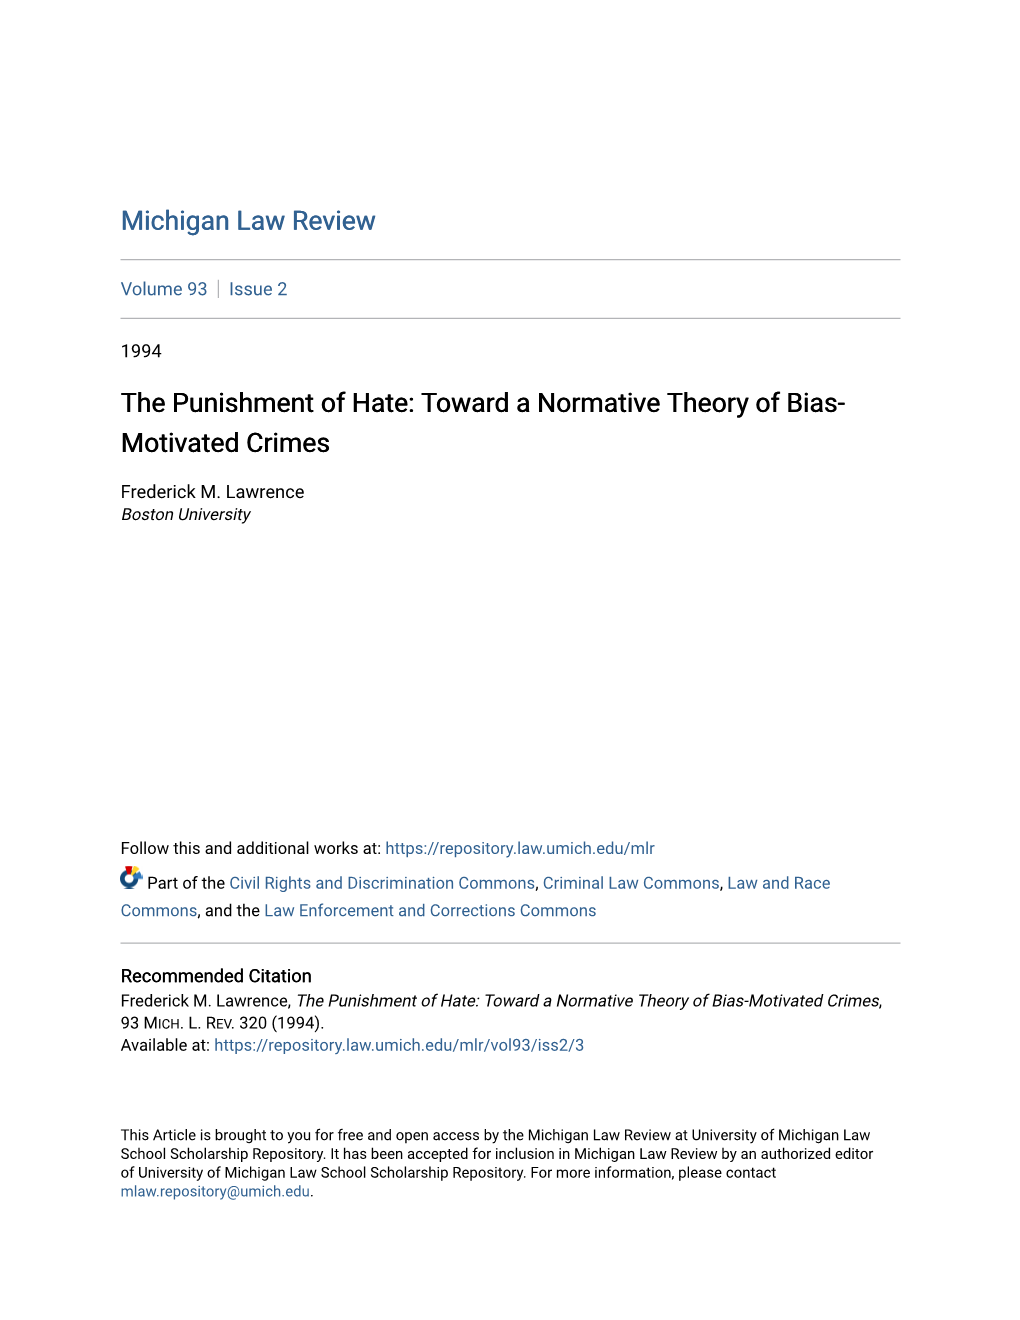 The Punishment of Hate: Toward a Normative Theory of Bias-Motivated Crimes, 93 MICH